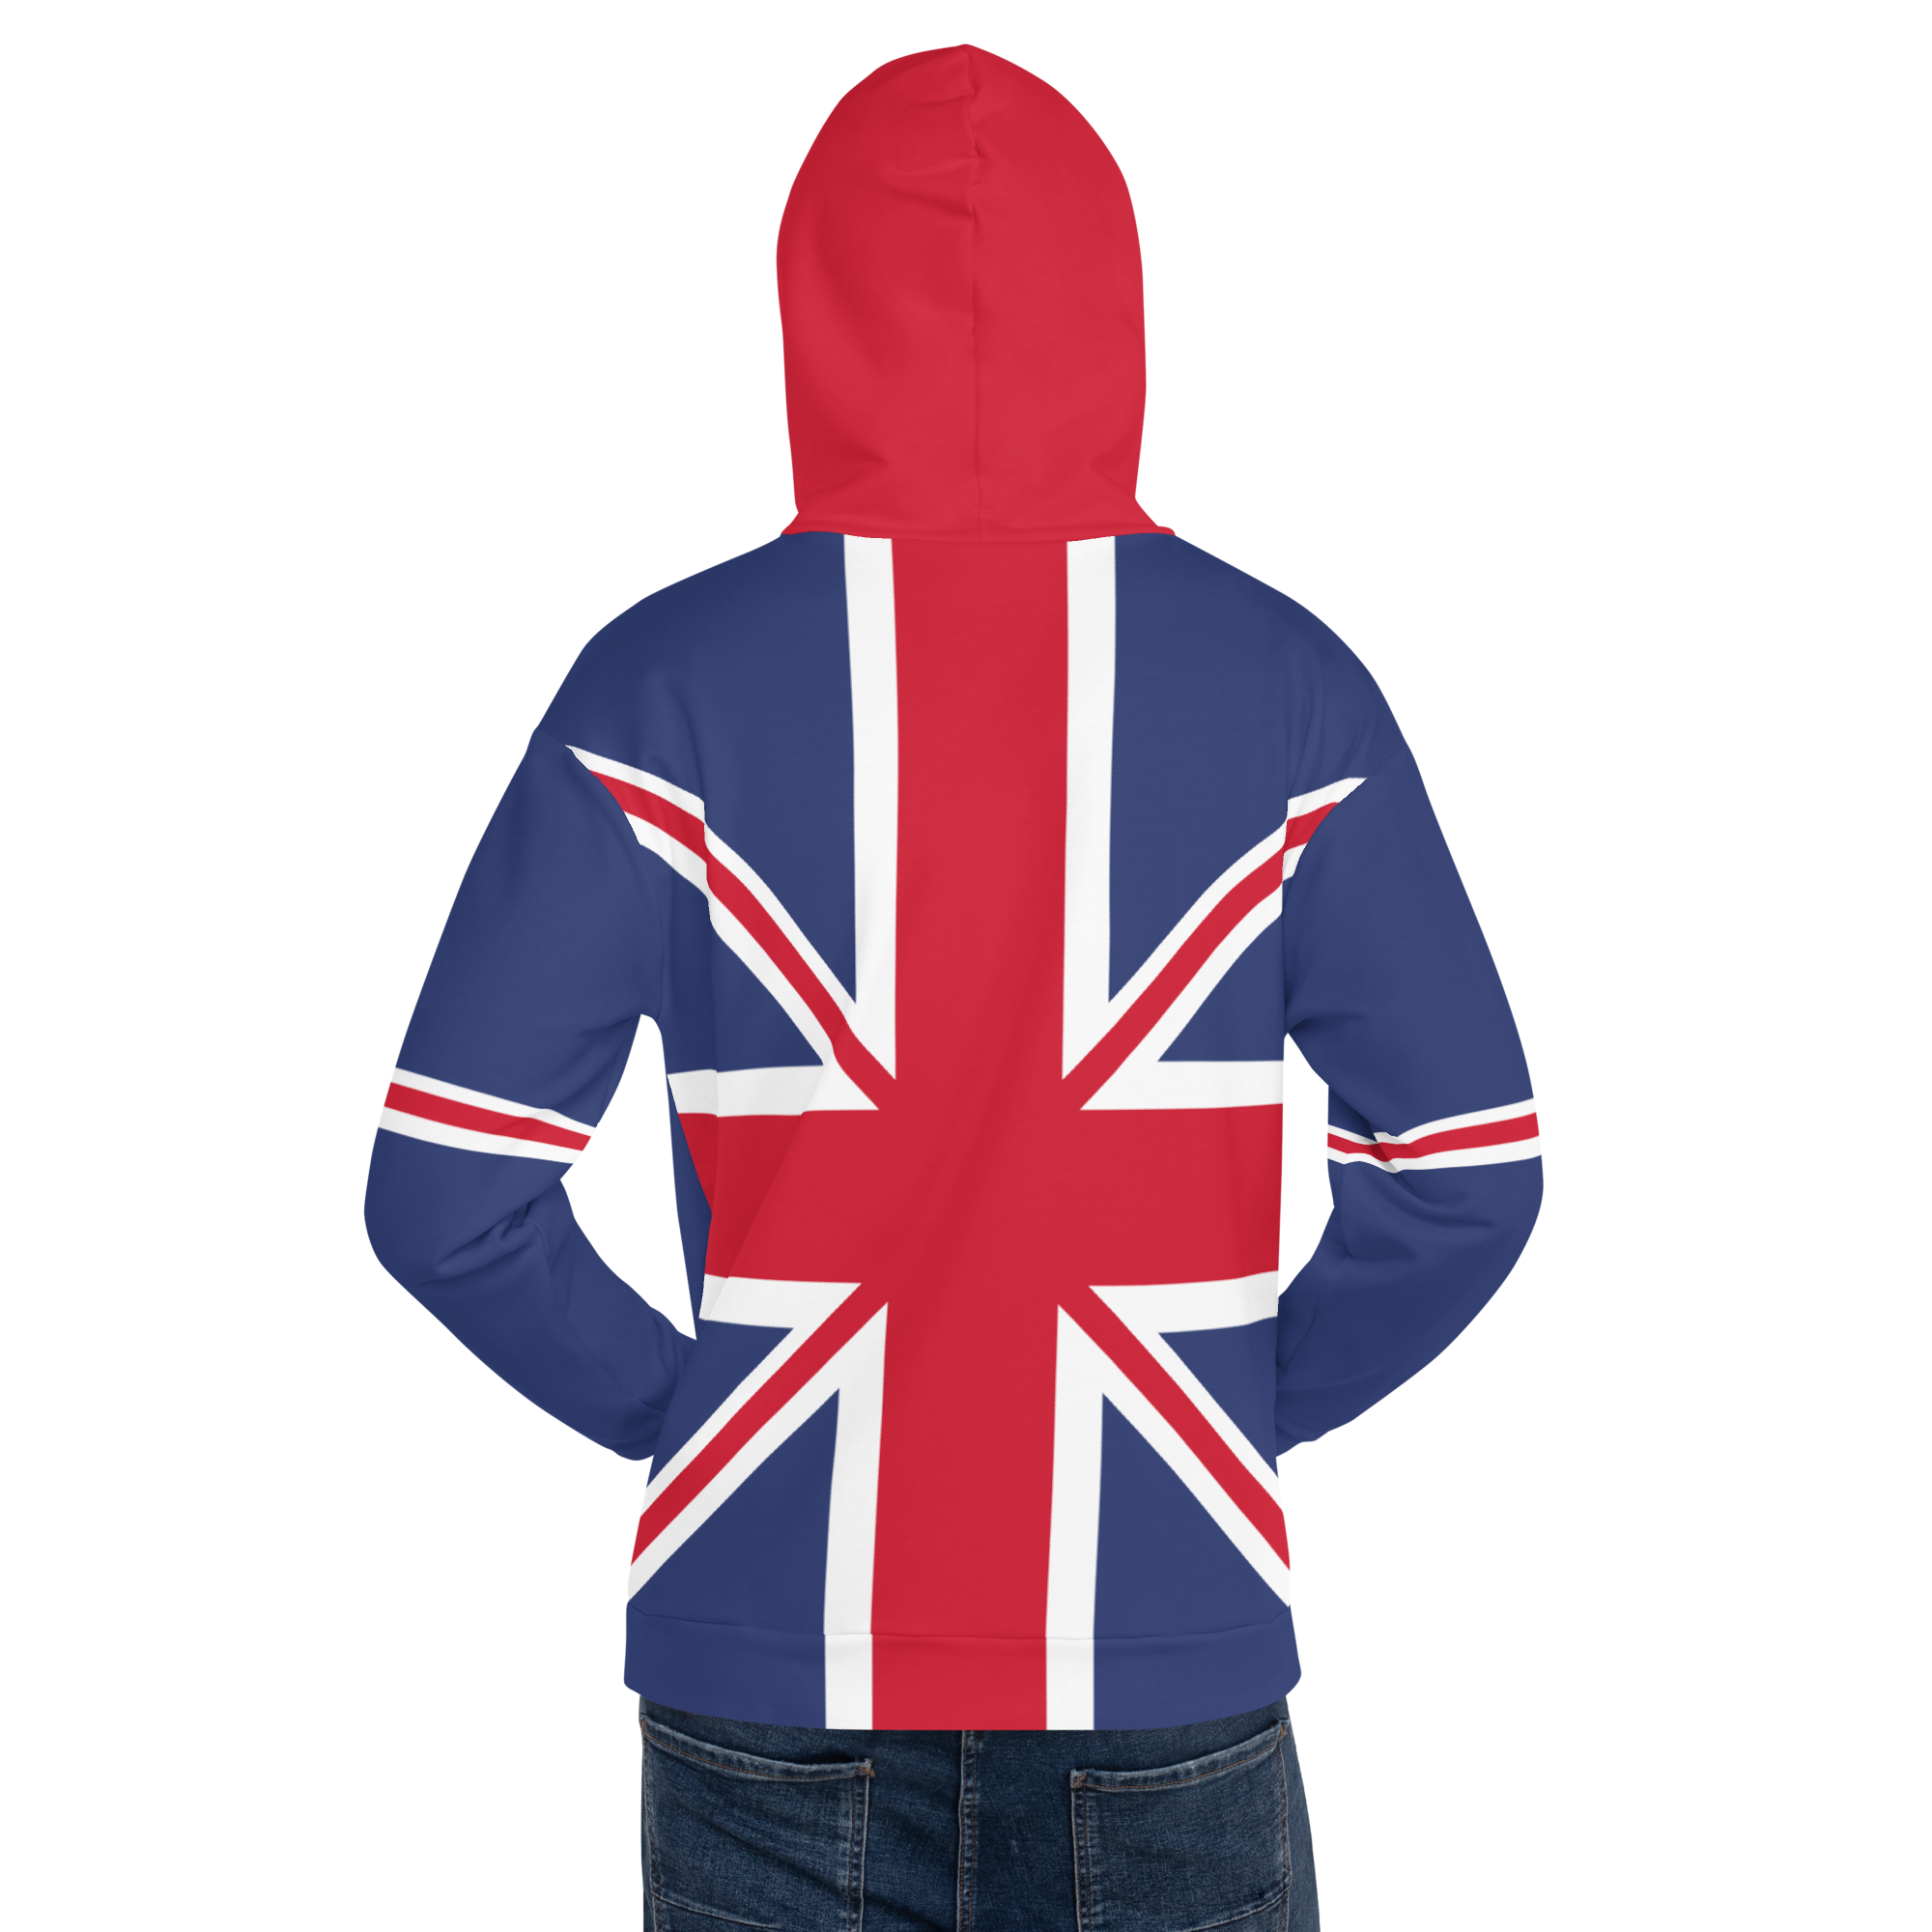 New 2023 arrivals! My colorful England flag inspired unisex oversized volleyball team hoodies by Volleybragswag are now sold on ETSY!